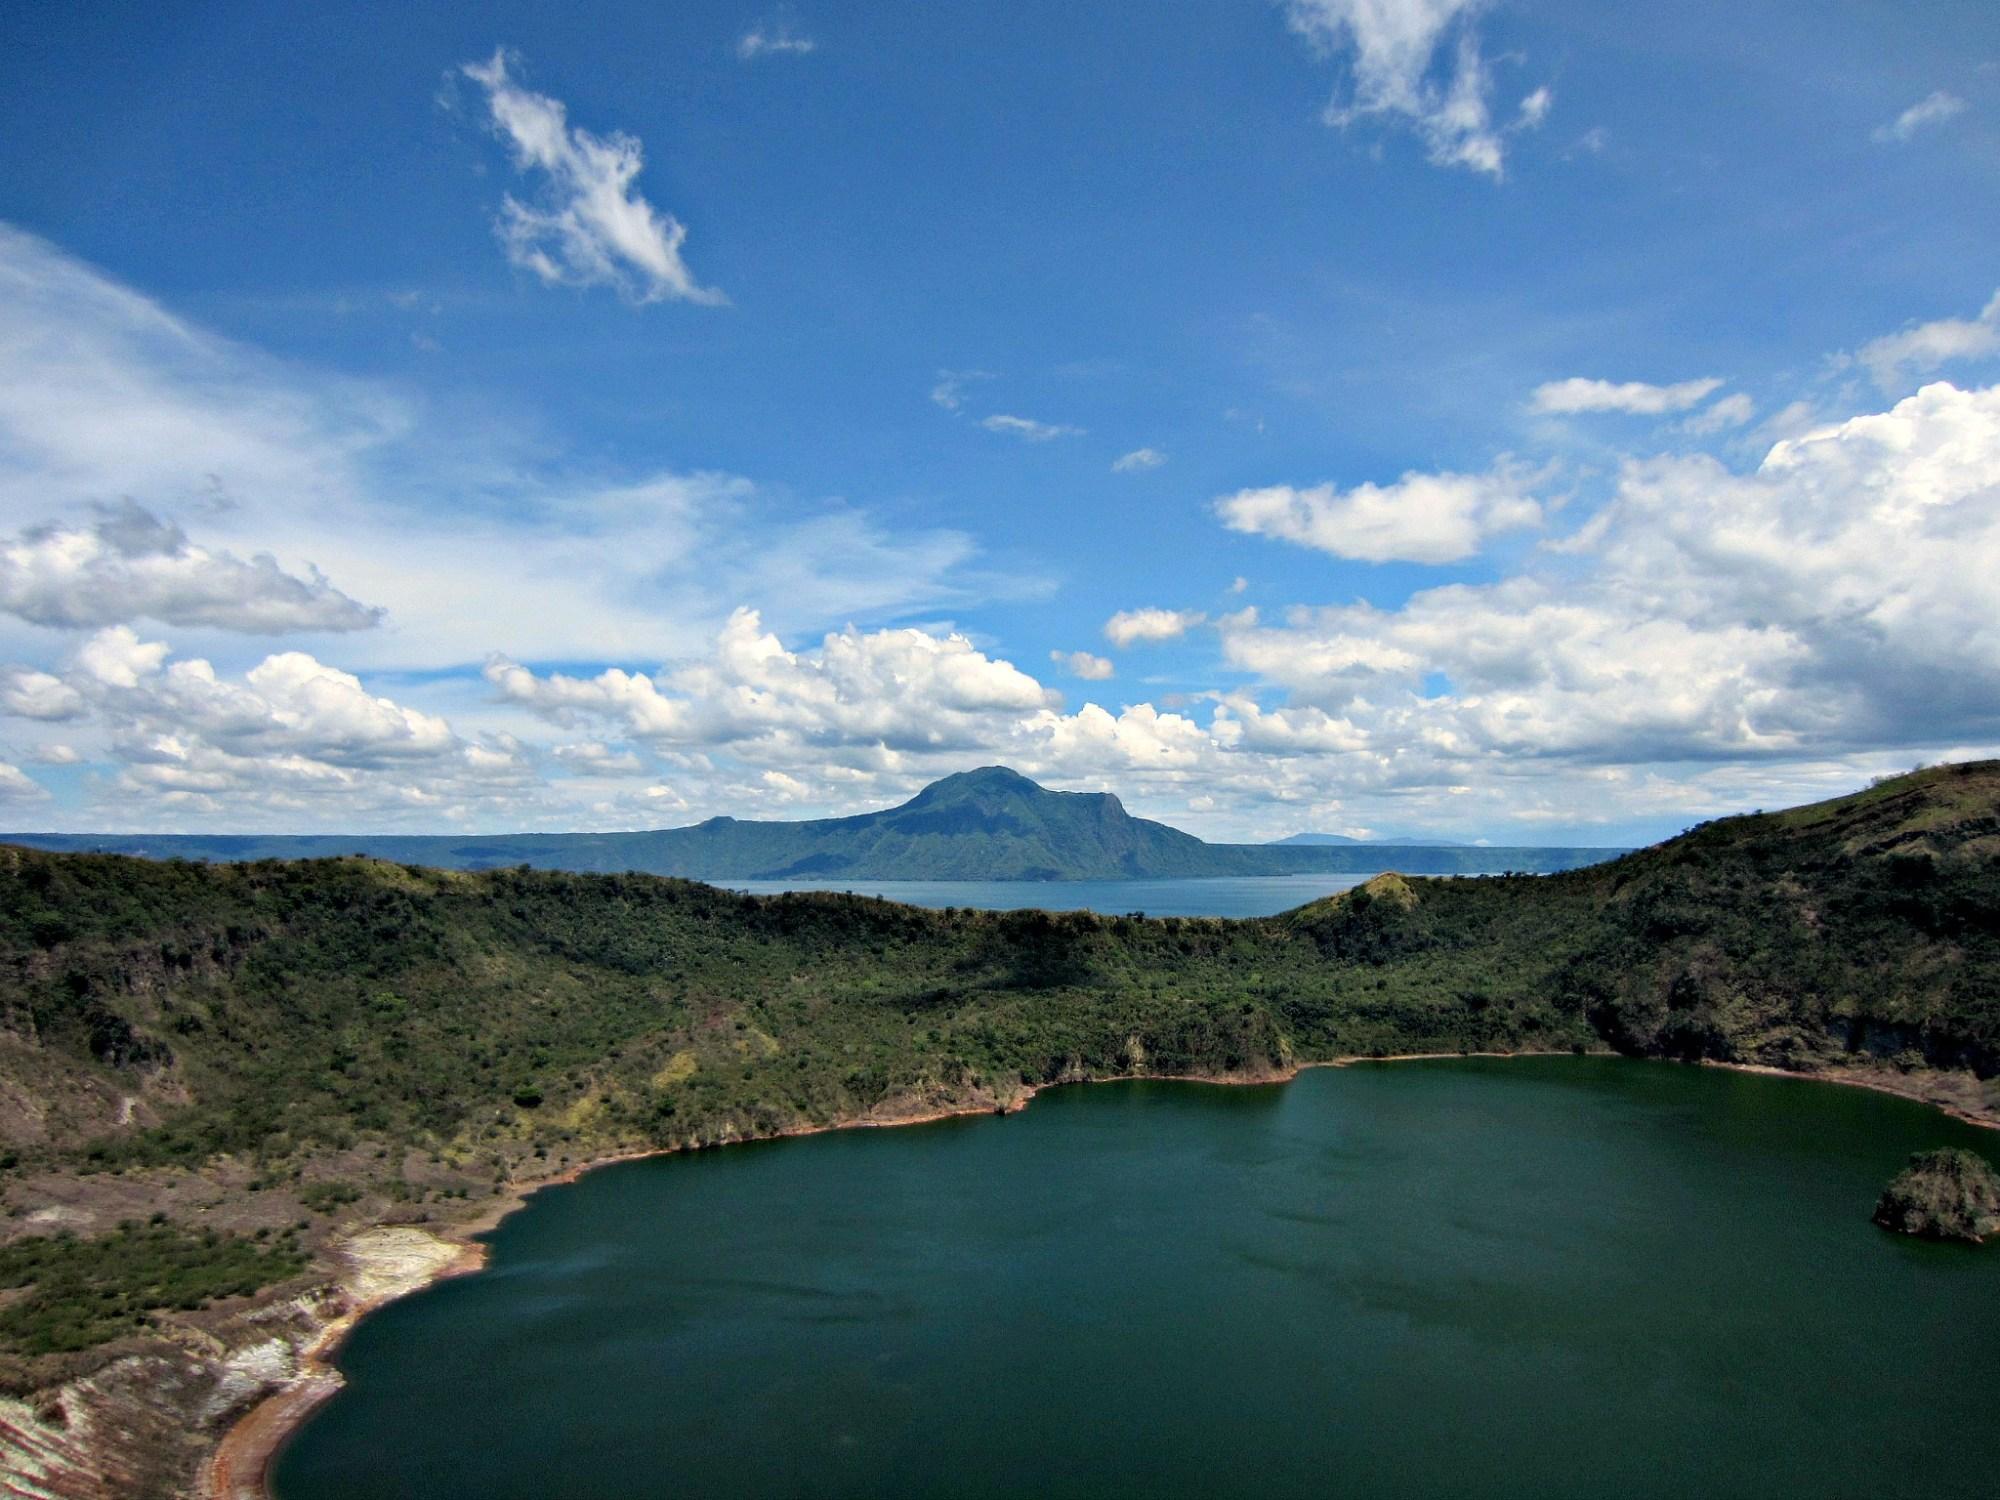 Mount Taal Volcano: An Easy Day Trip From Manila